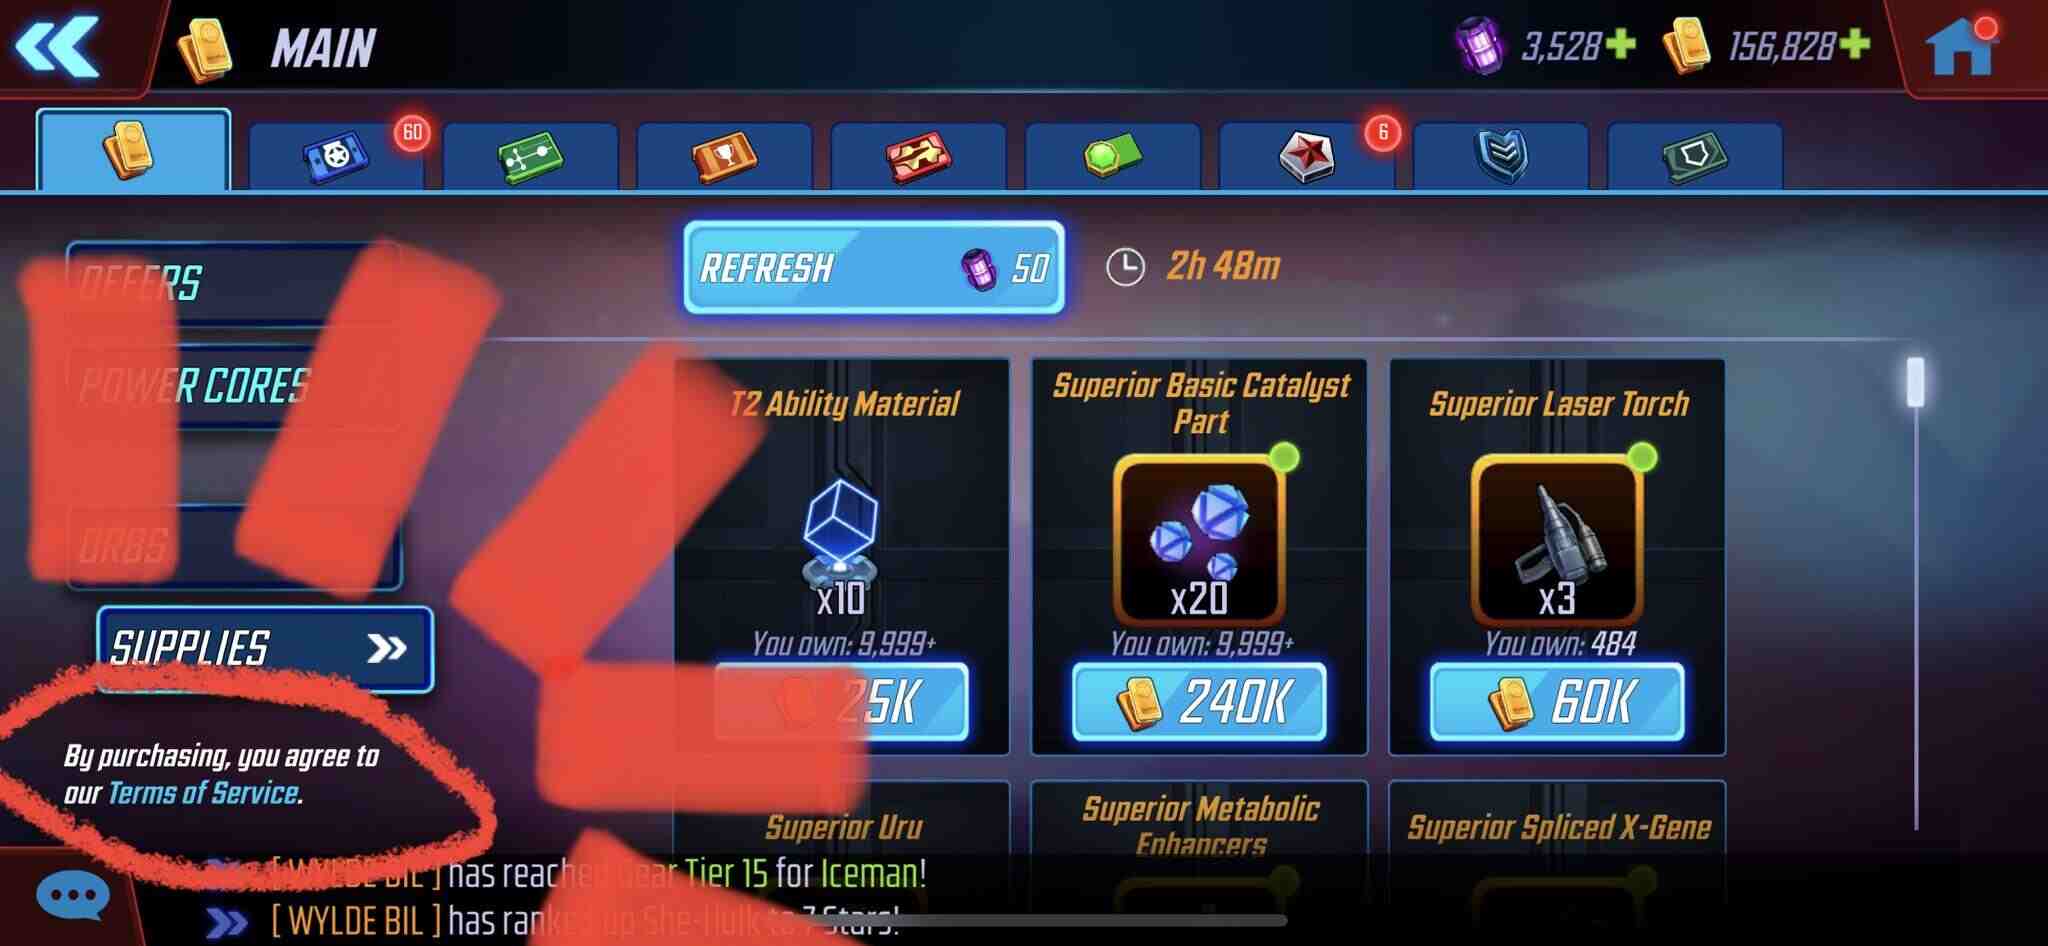 Anyone else missing the 'get code' button under settings? :  r/MarvelStrikeForce